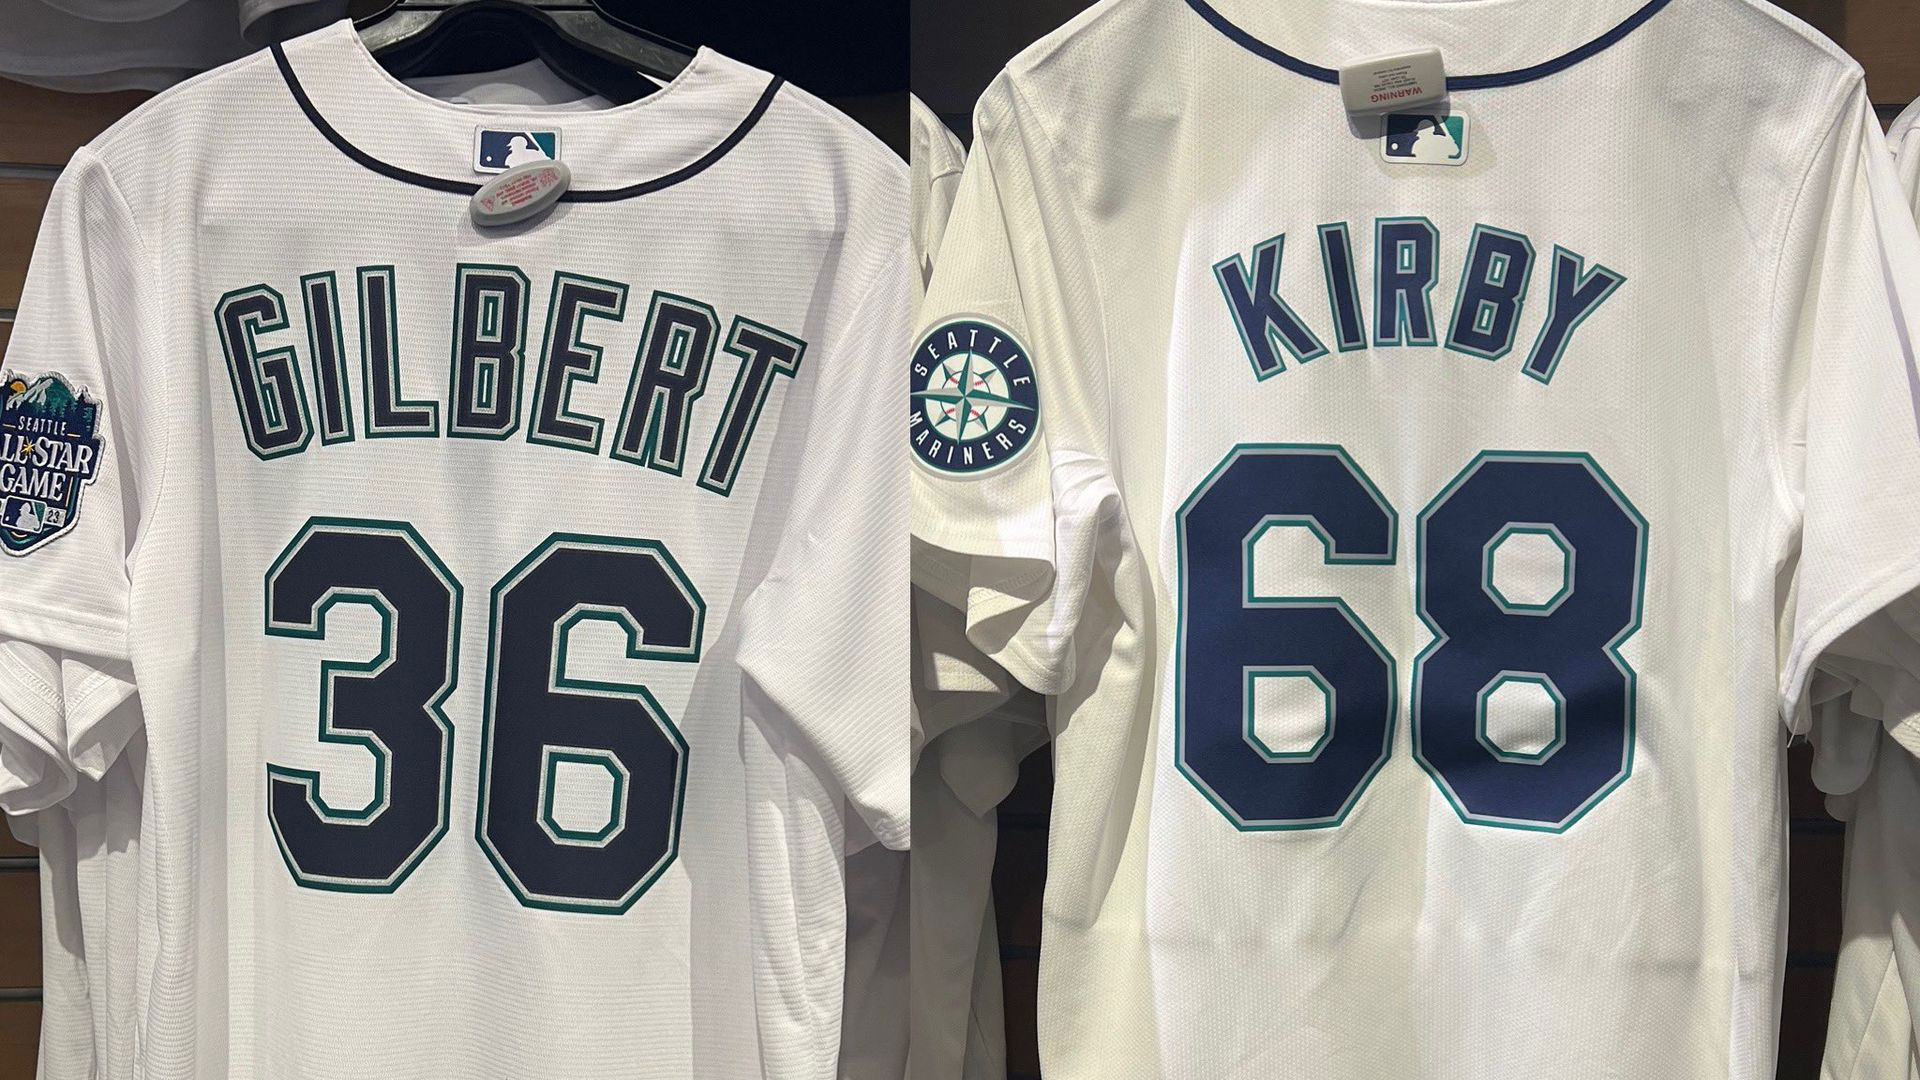 MLB and Nike announced details of their new player jerseys, and they